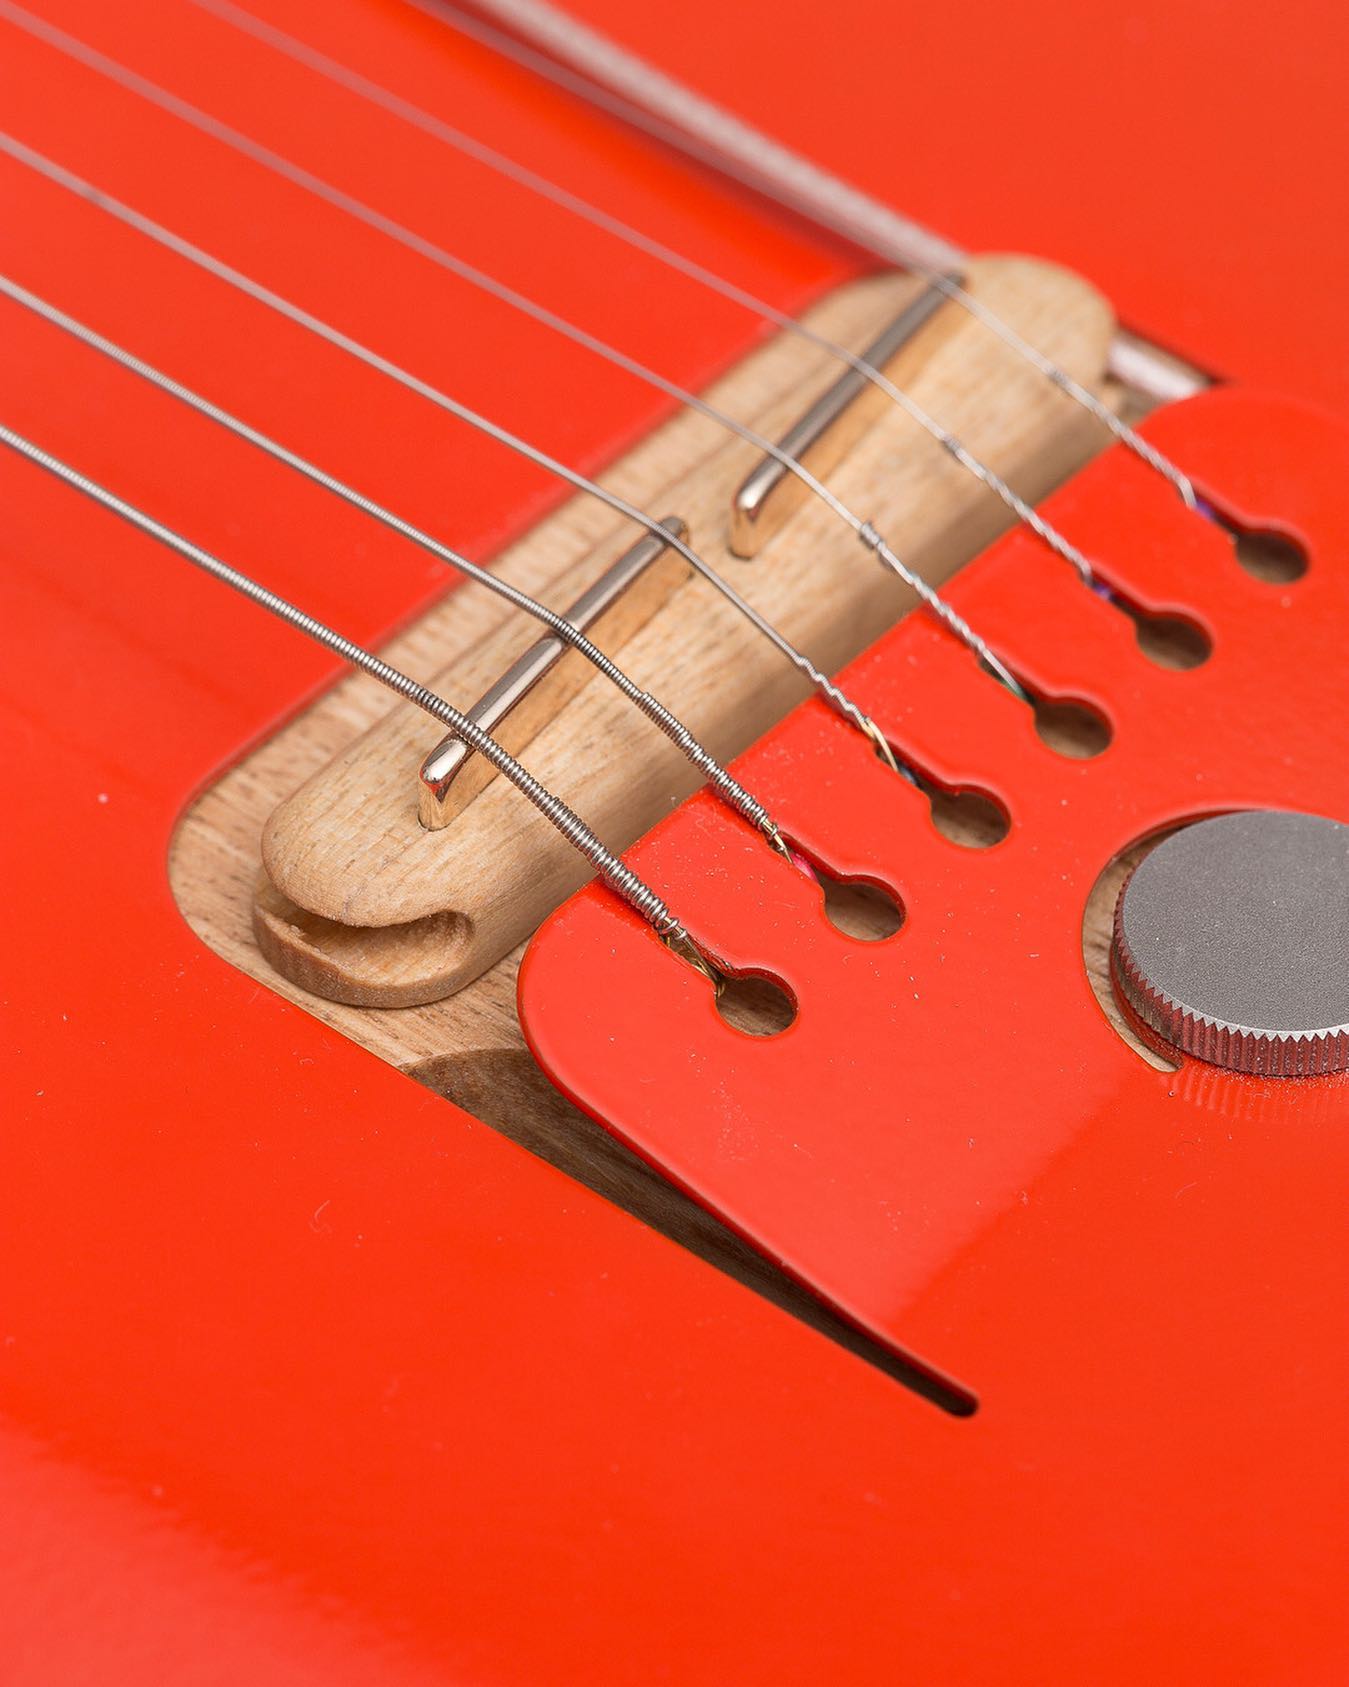 The Cosmo bridge resembles an acoustic guitar rather than a conventional electric guitar